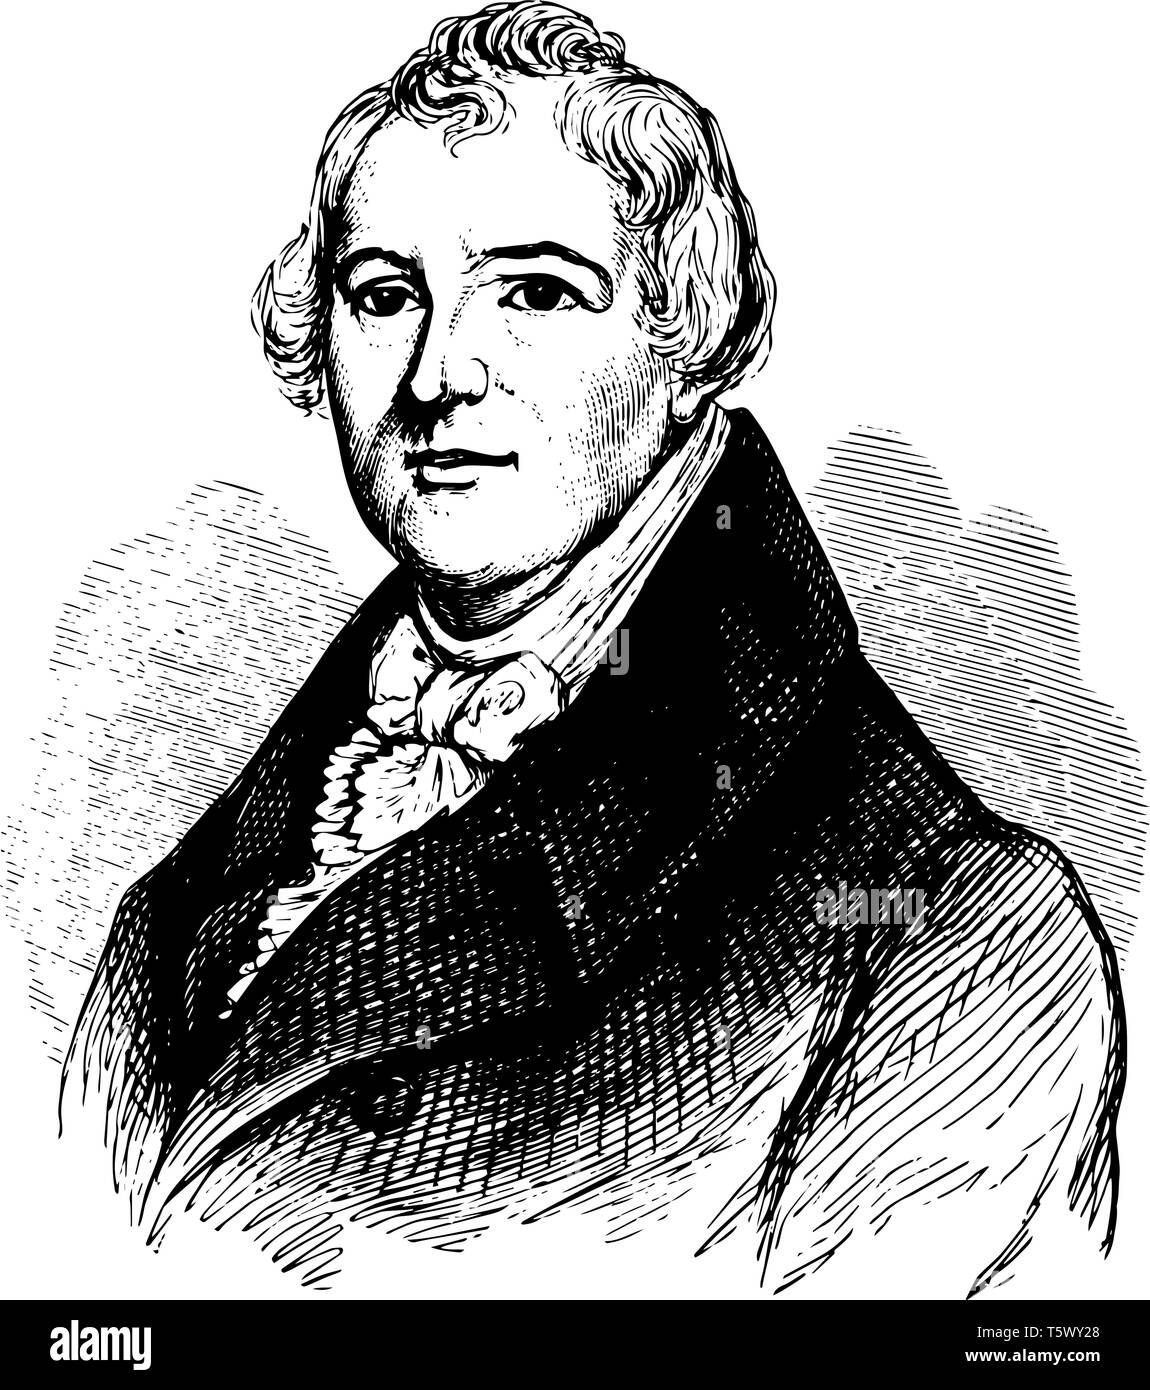 William Hull 1753 to 1825 he was an American soldier politician and first governor of Michigan Territory vintage line drawing or engraving illustratio Stock Vector